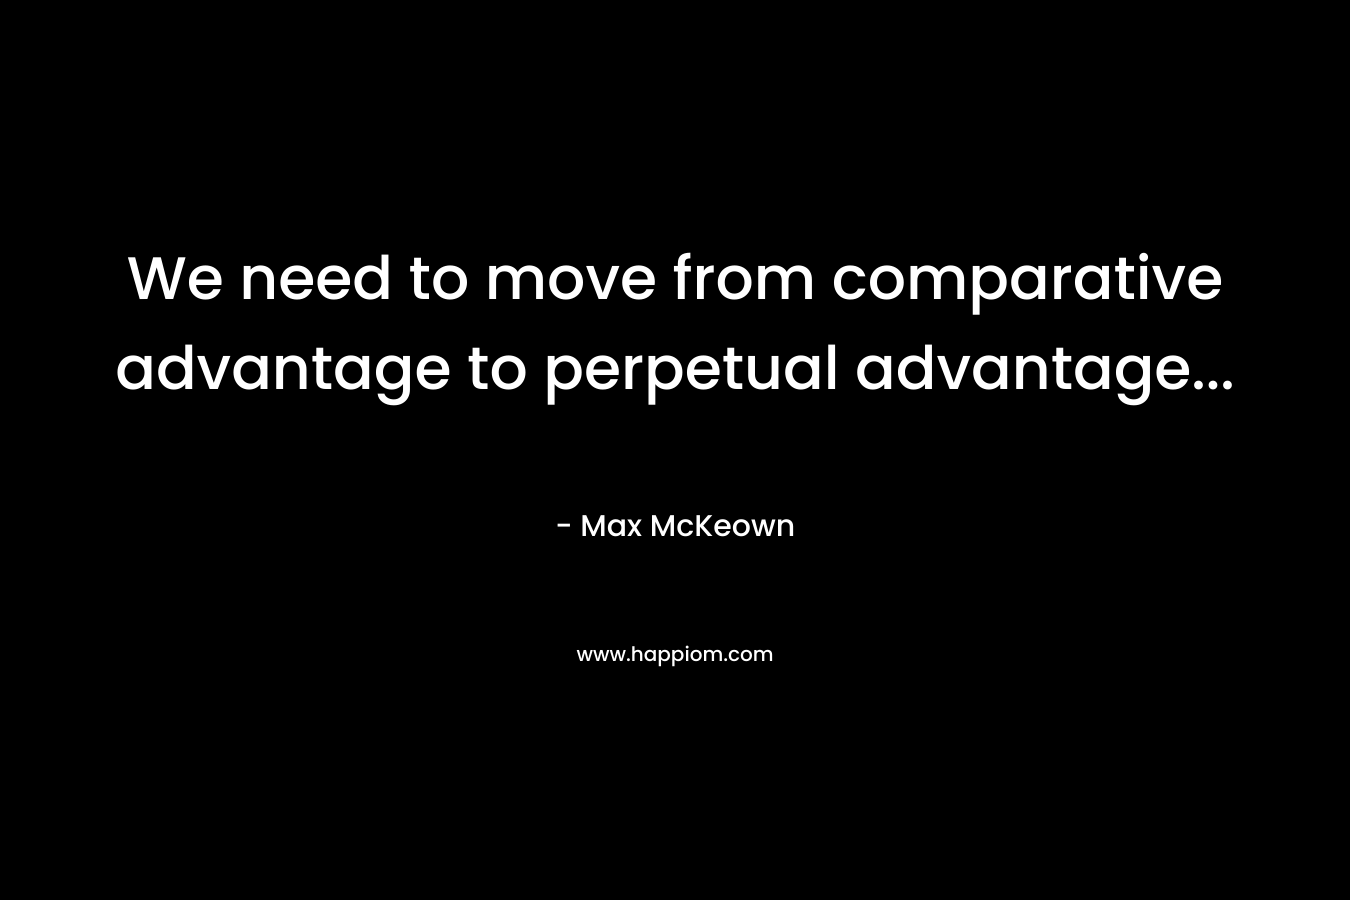 We need to move from comparative advantage to perpetual advantage...